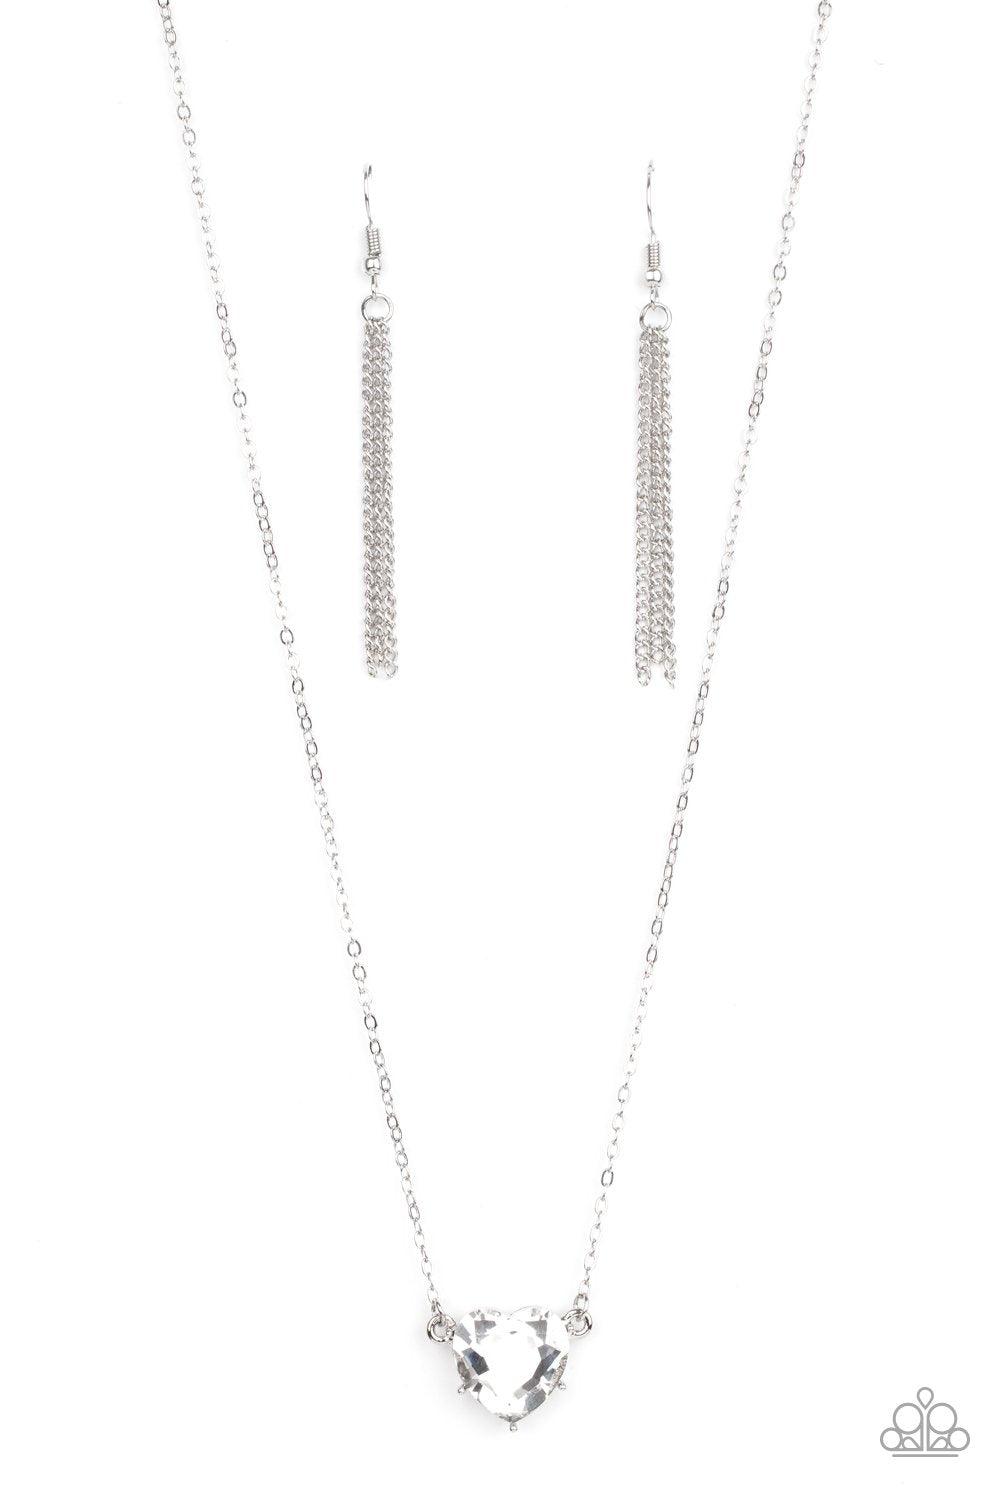 Paparazzi Accessories She Works HEART for the Money - White Cut into a flirtatious heart shape, a dramatically oversized white rhinestone pendant swings from the bottom of a dainty silver chain below the collar for a glamorous finish. Features an adjustab